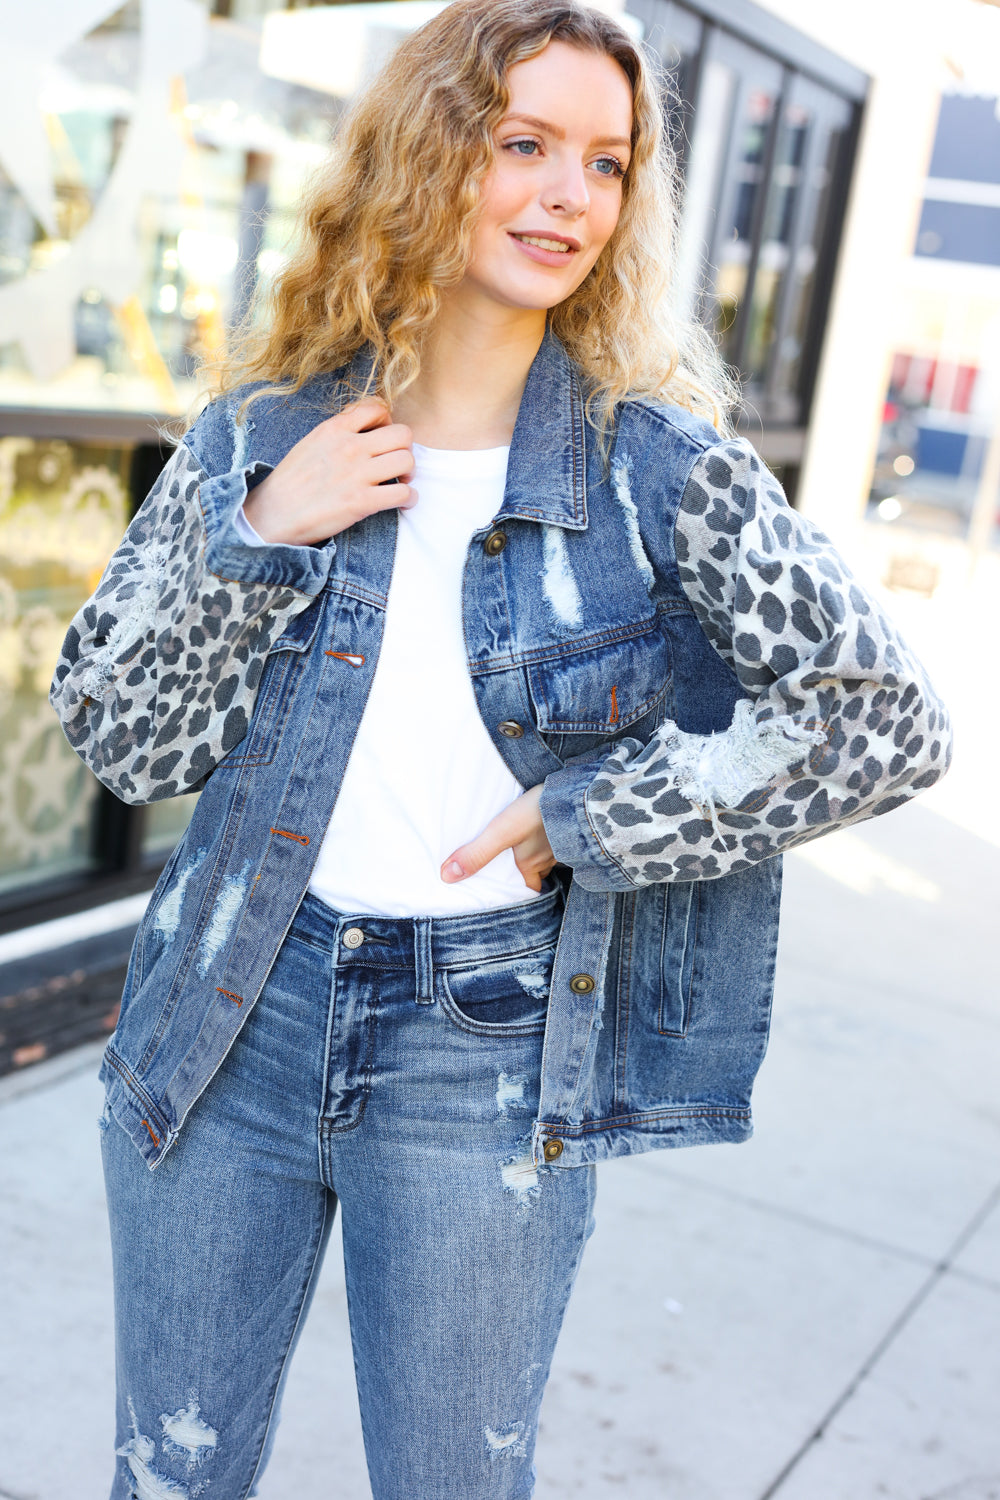 Give It Your All Distressed Denim Jacket